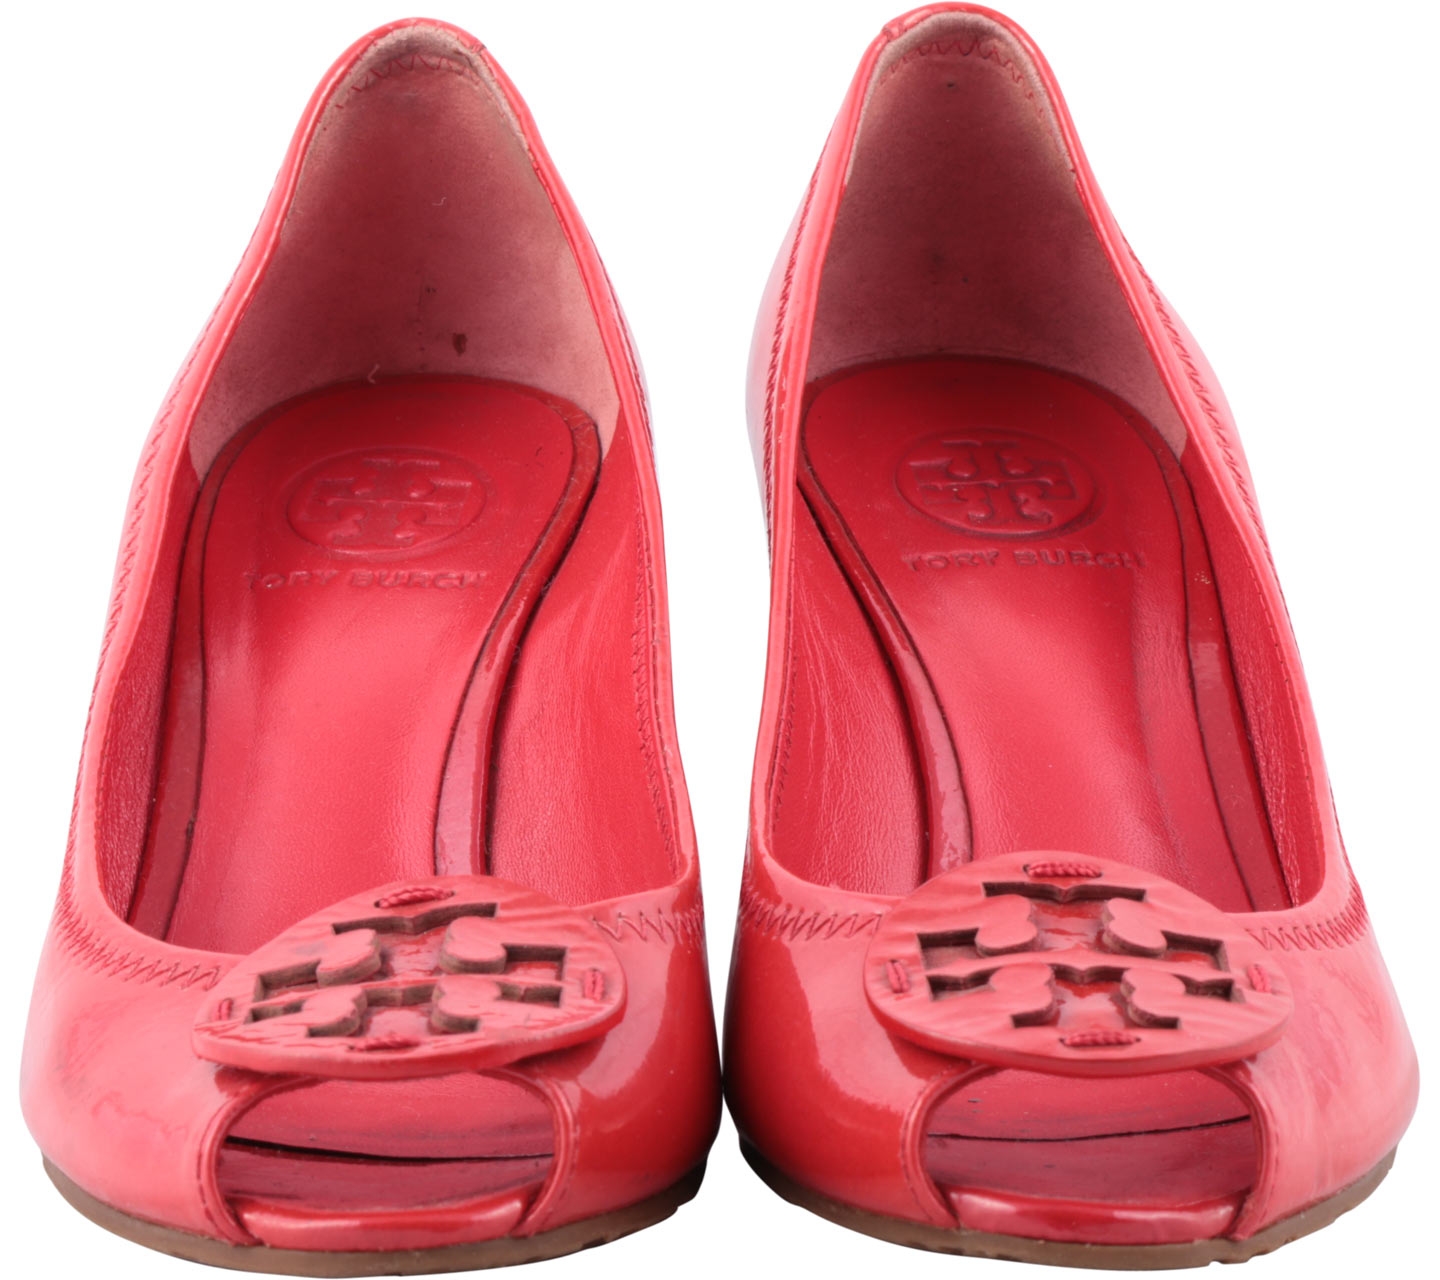 Tory Burch Red And Brown Wedges